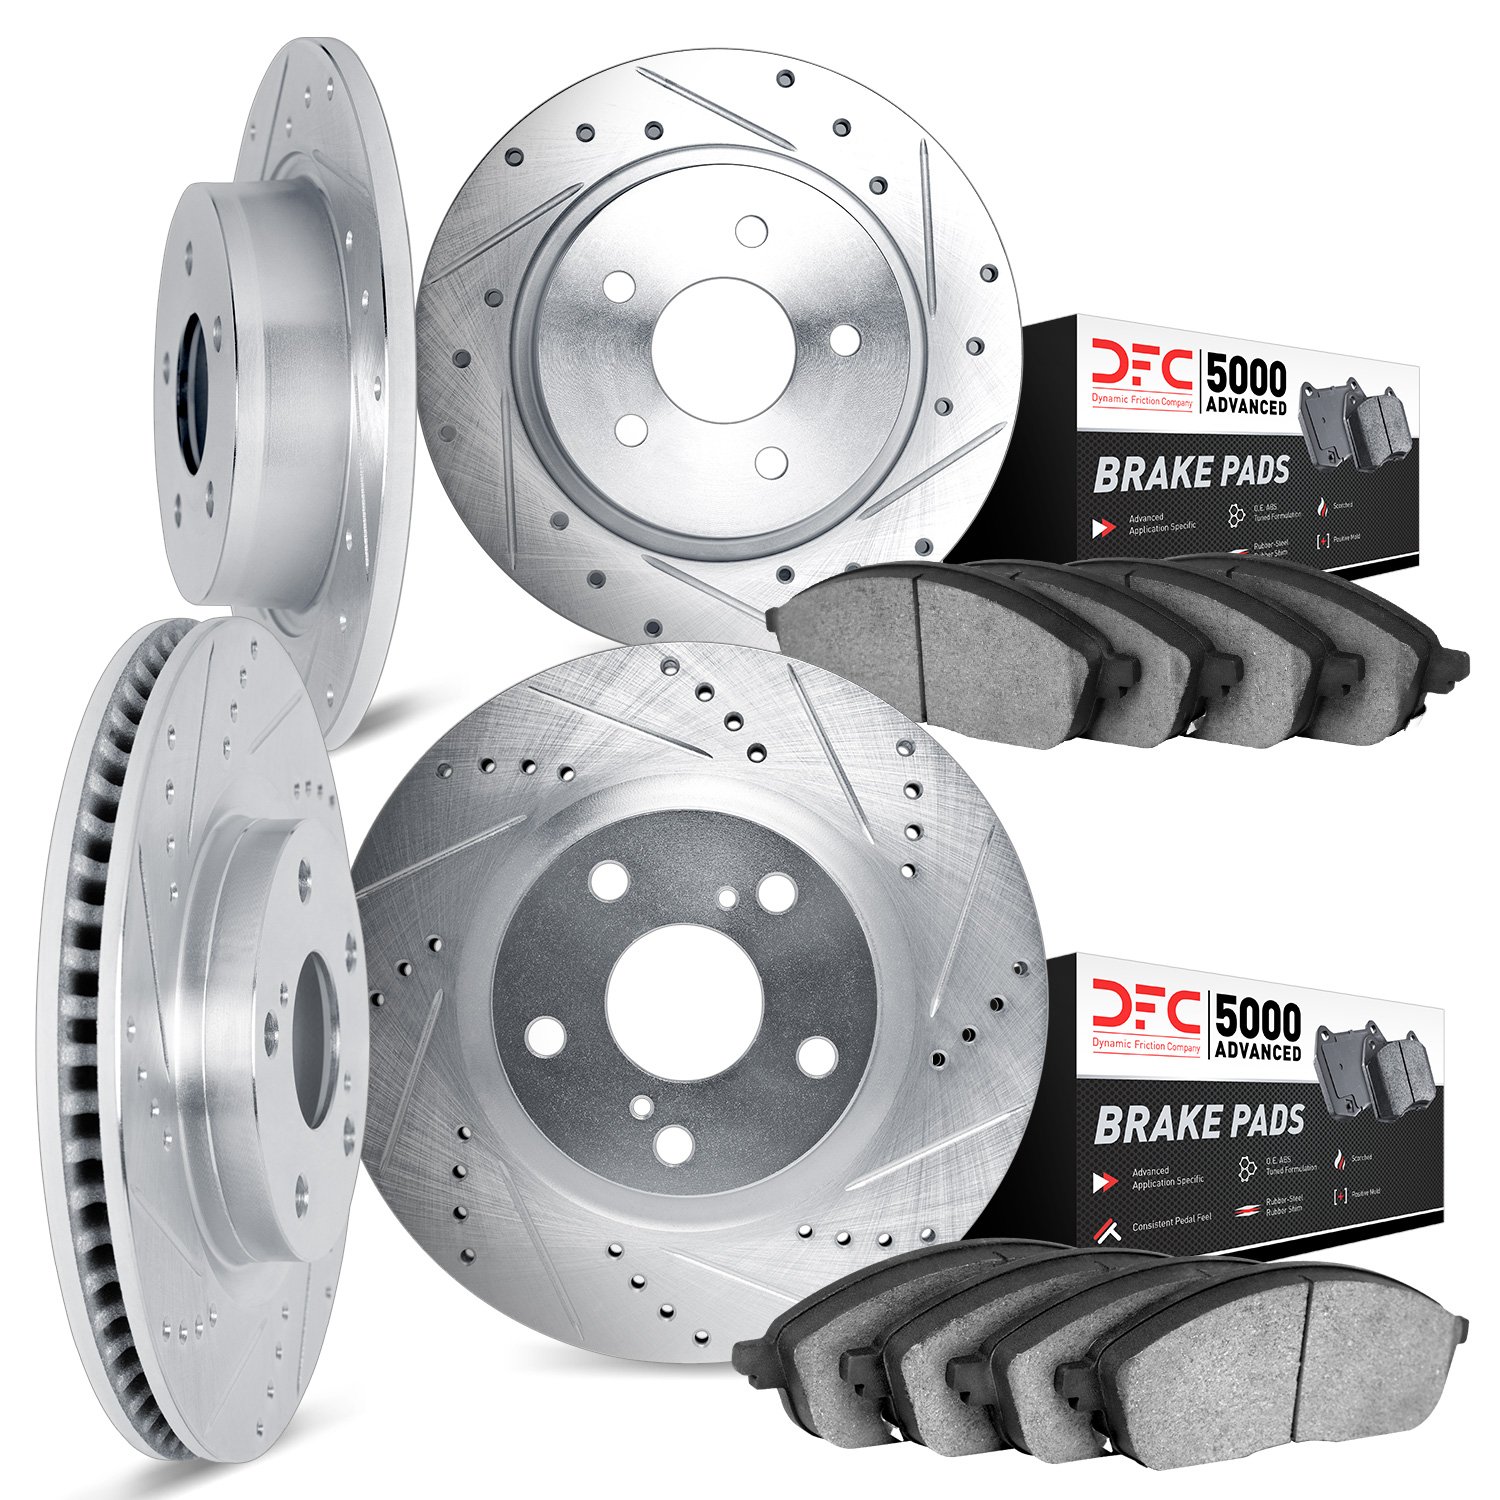 7504-54389 Drilled/Slotted Brake Rotors w/5000 Advanced Brake Pads Kit [Silver], 2020-2020 Ford/Lincoln/Mercury/Mazda, Position: